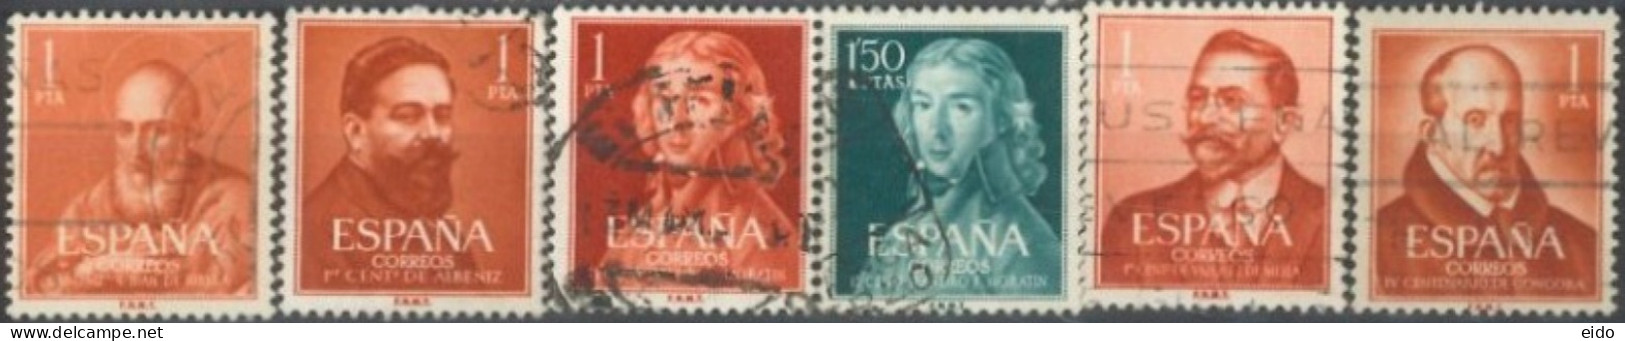 SPAIN, 1960/61, SAINTS & CELEBRITIES STAMPS SET OF 6, USED. - Used Stamps